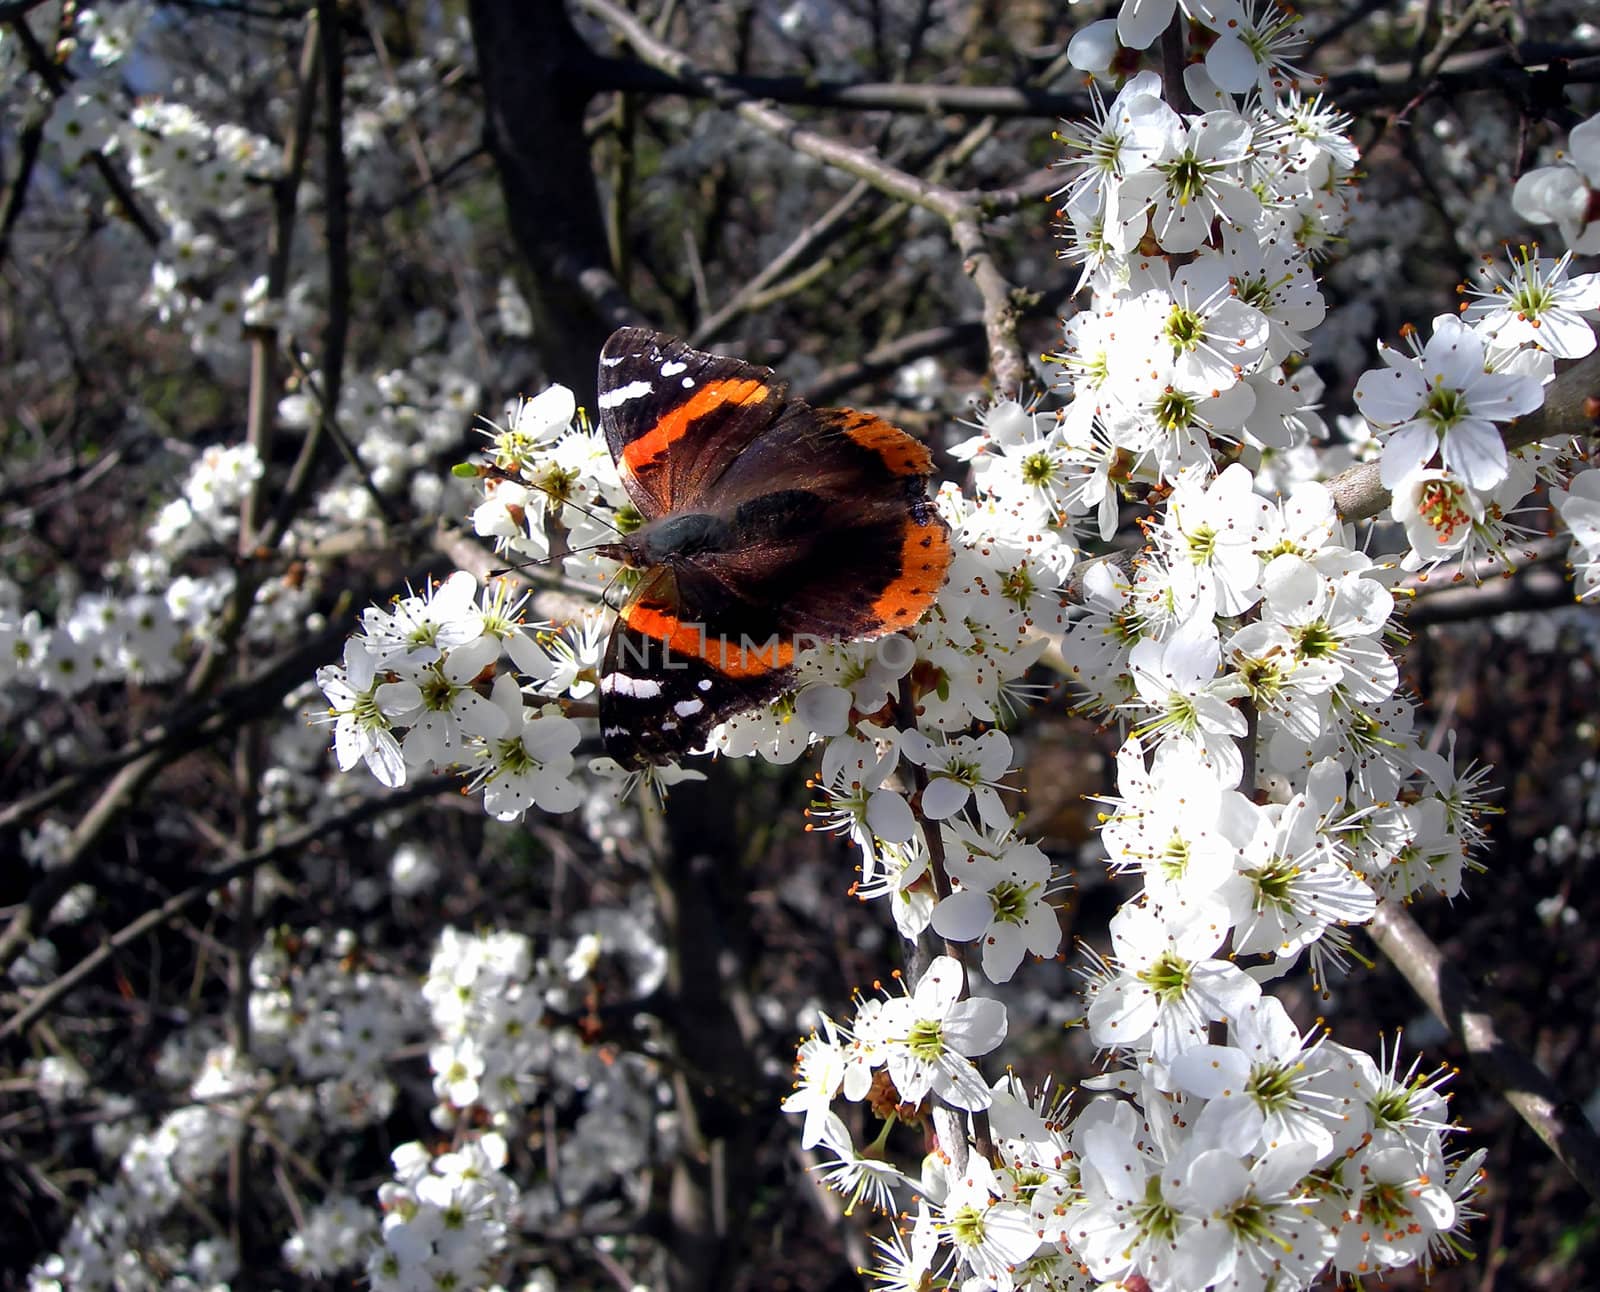           Nice butterfly on a apple tree in blossom. Symbol of the spring season.